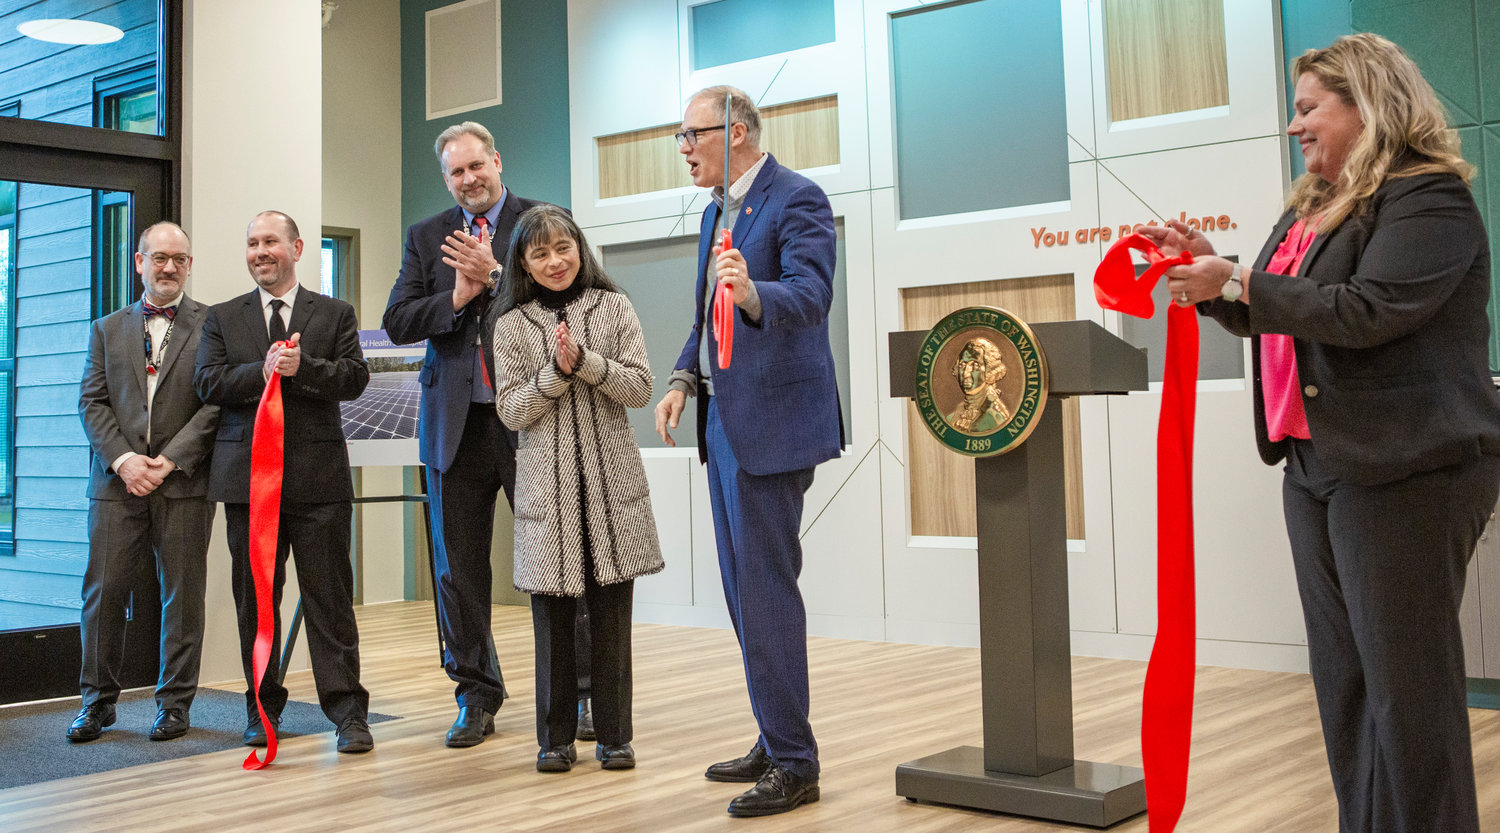 Gov. Jay Inslee and other officials cut the ribbon on a new Civil Center for Behavioral Health at Maple Lane School between Centralia and Rochester during a grand opening ceremony on Friday, Jan. 27.